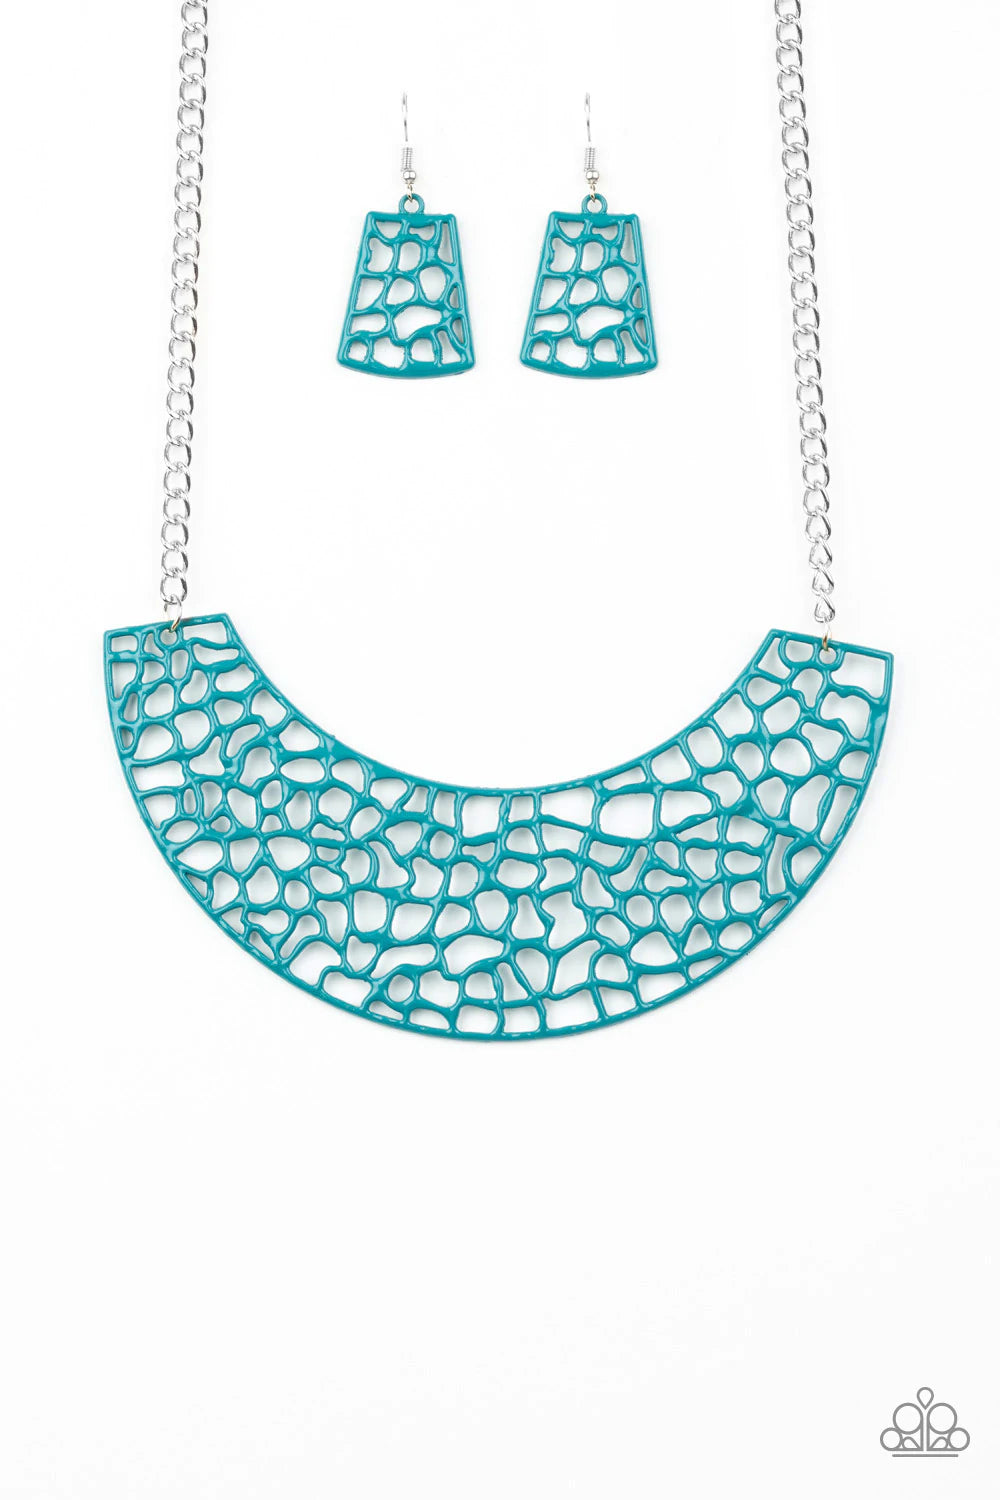 Paparazzi Accessories  - Powerful Prowl #N868 Peg -  Blue Necklace